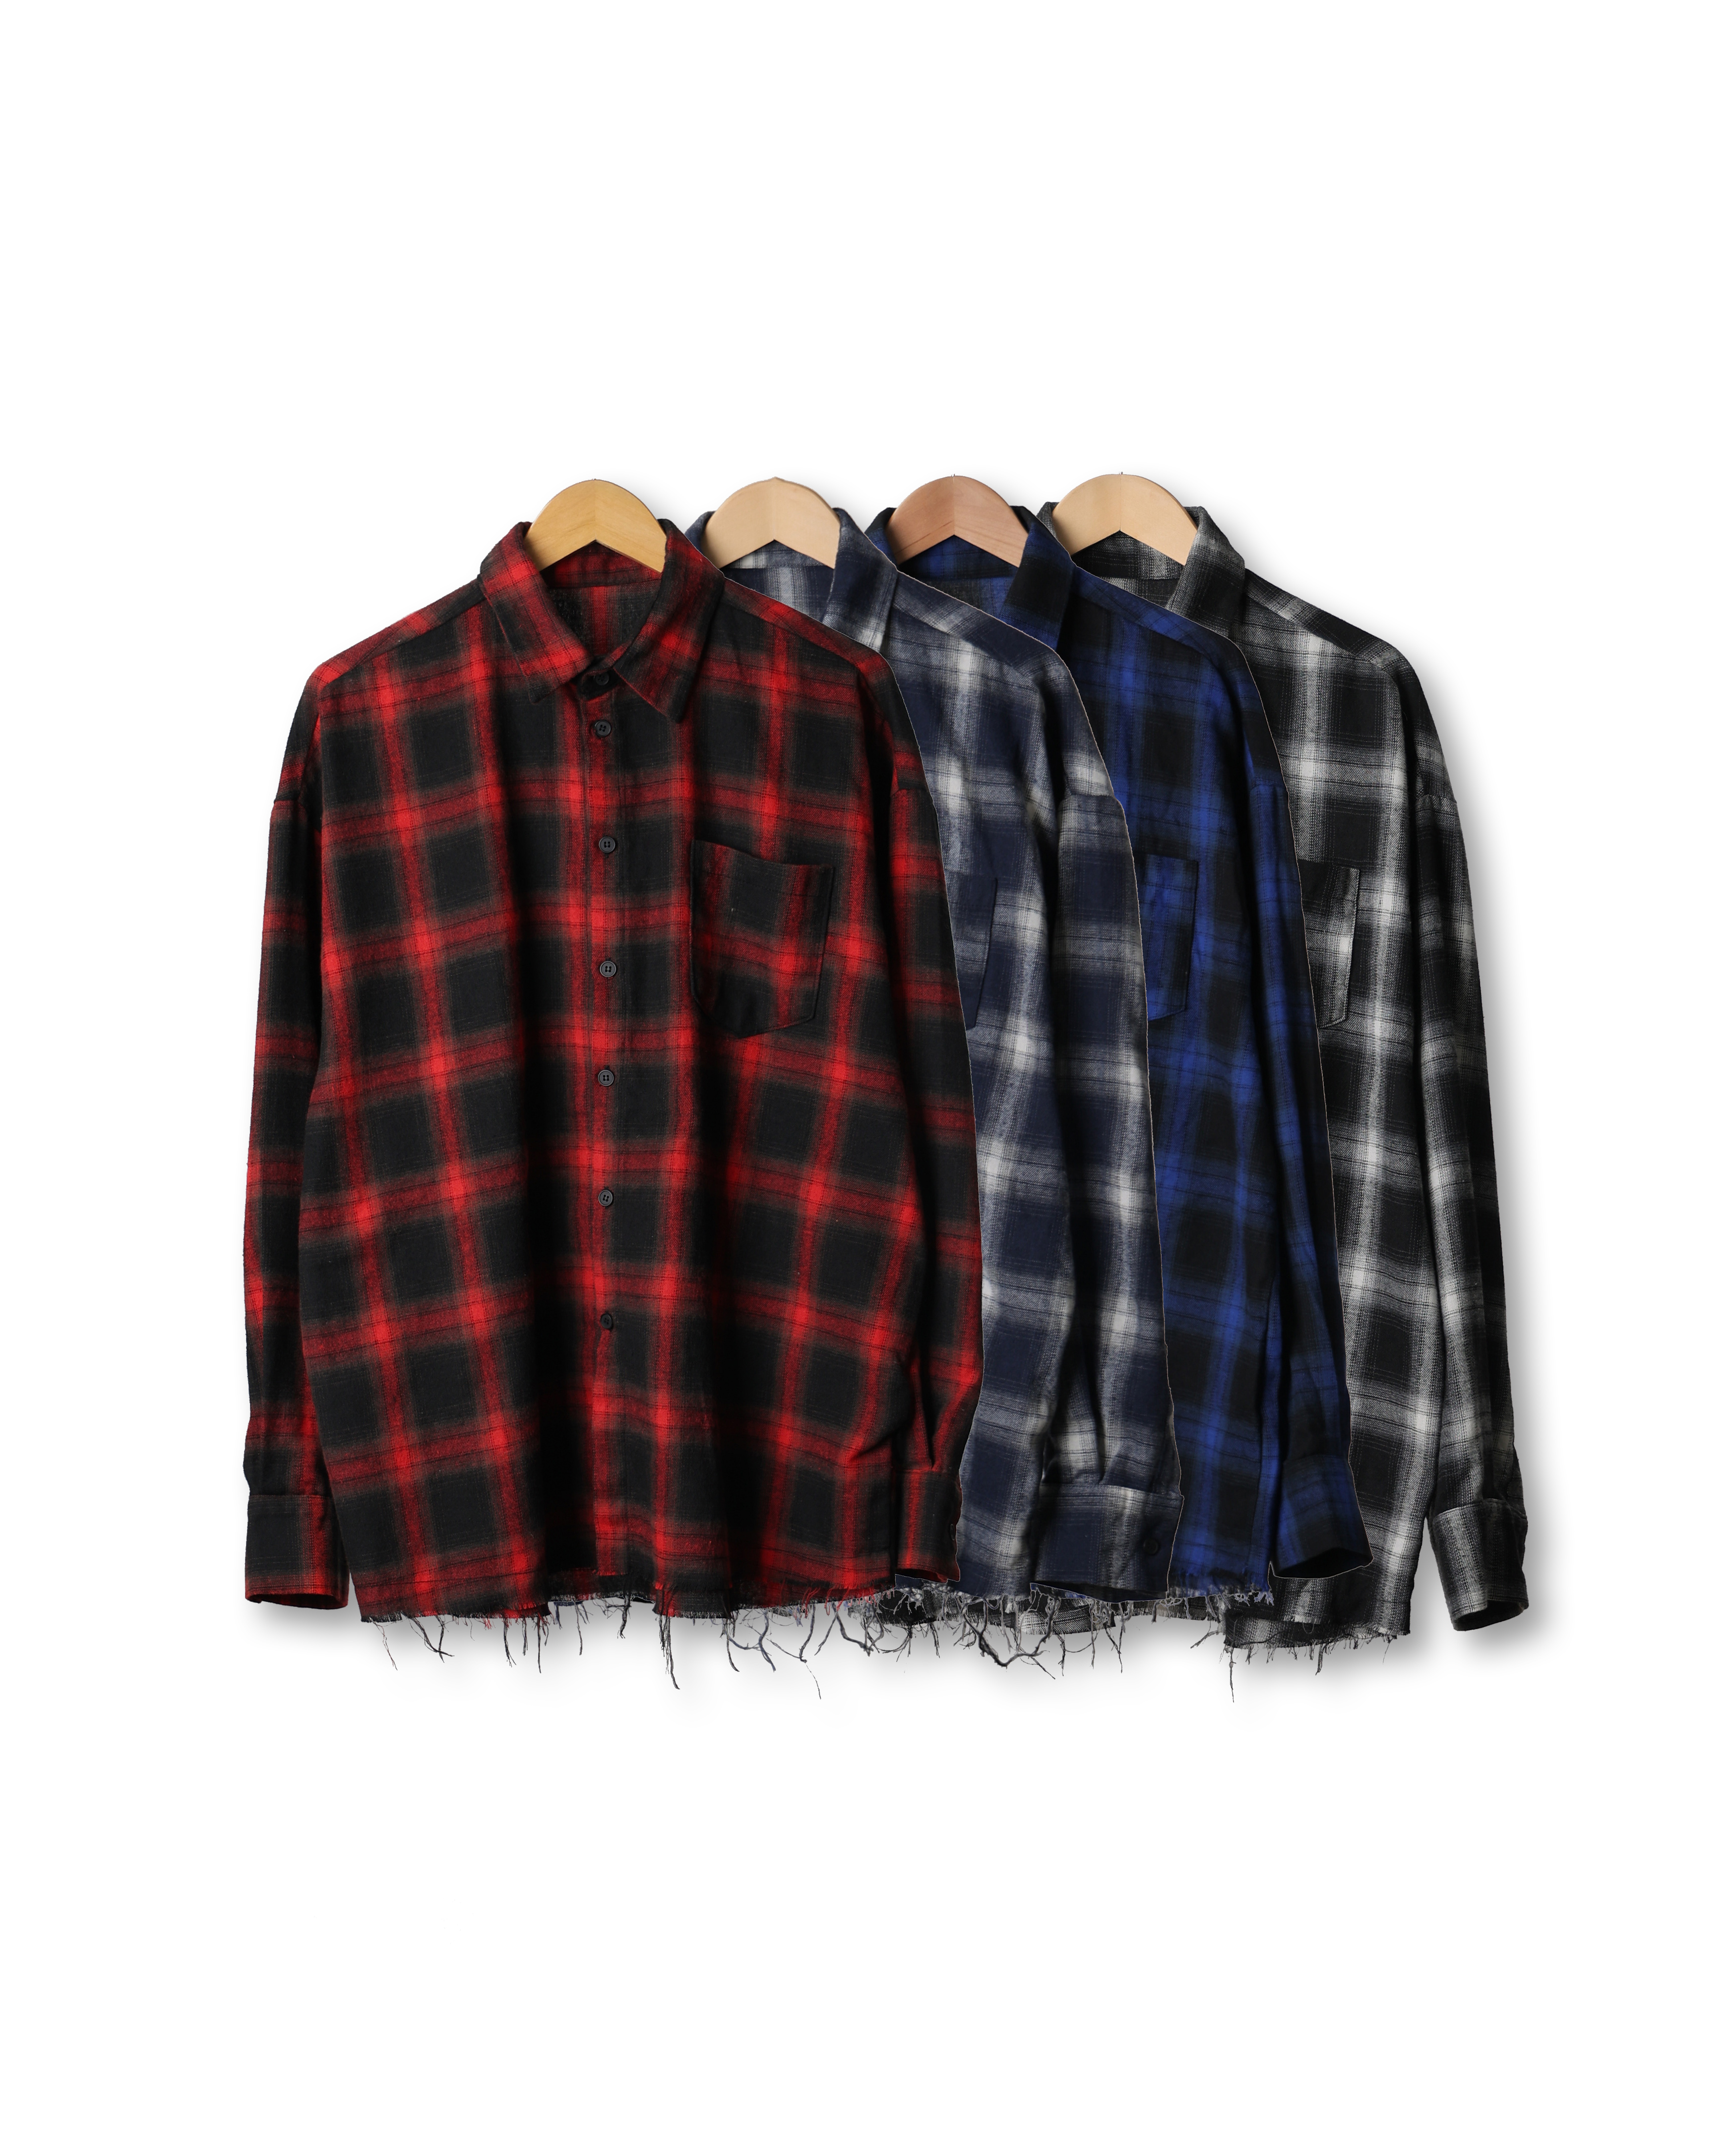 DOVR OMBRE Damaged Check Over Shirts (Black/Navy/Blue/Red)